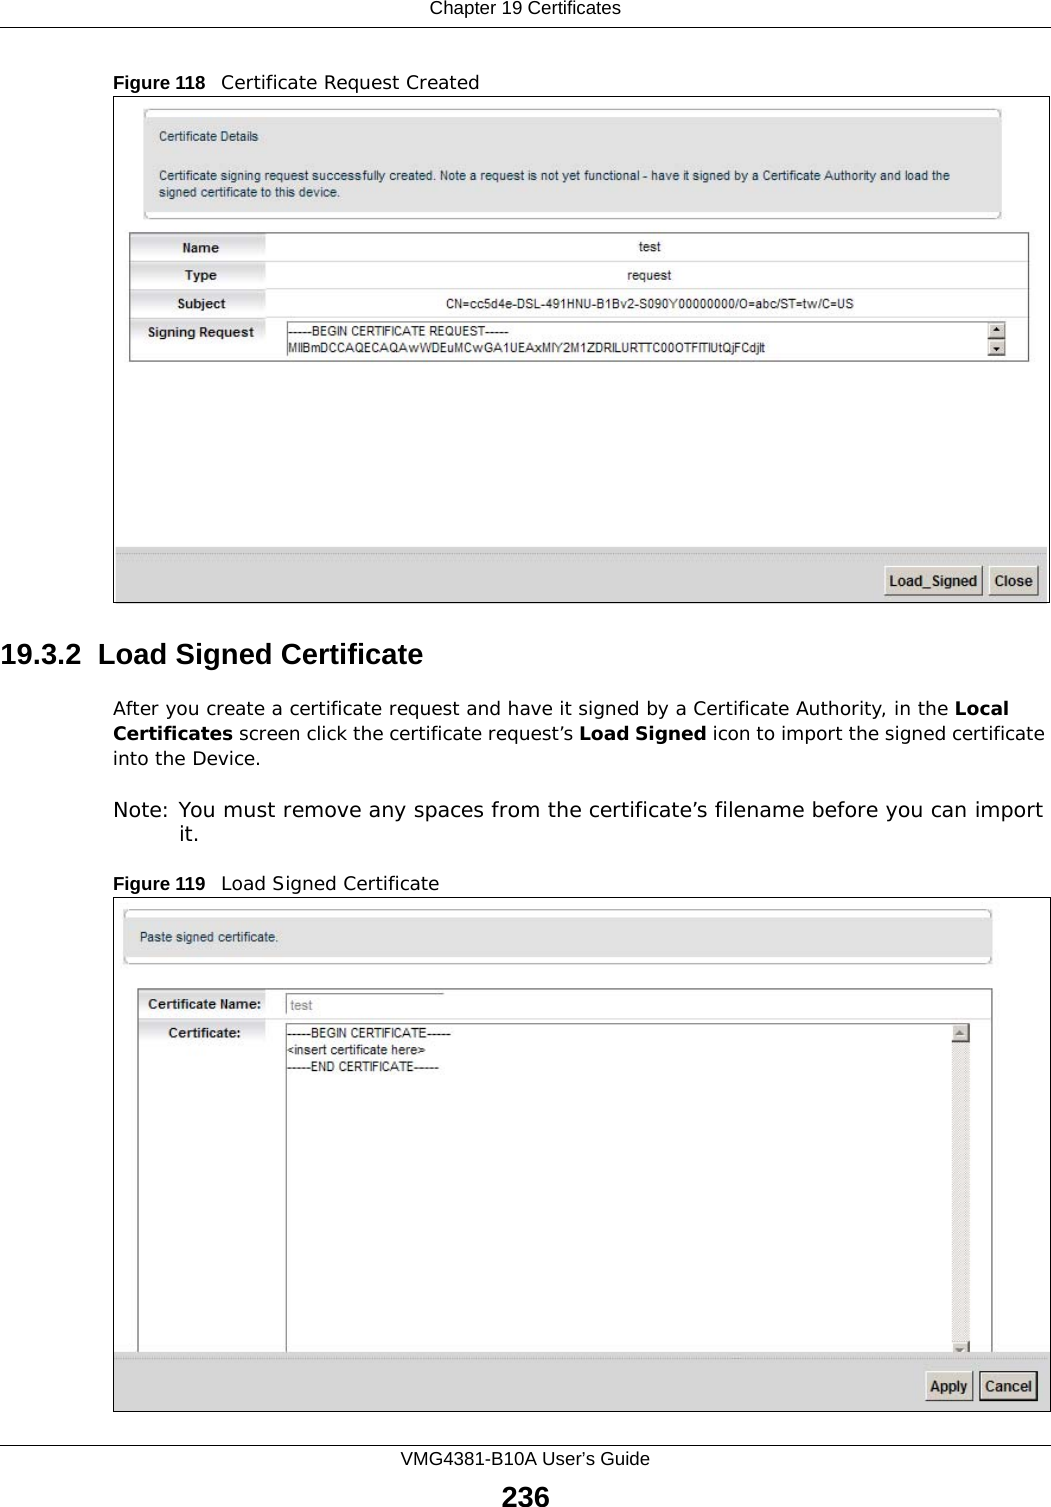 Chapter 19 CertificatesVMG4381-B10A User’s Guide236Figure 118   Certificate Request Created19.3.2  Load Signed Certificate After you create a certificate request and have it signed by a Certificate Authority, in the Local Certificates screen click the certificate request’s Load Signed icon to import the signed certificate into the Device. Note: You must remove any spaces from the certificate’s filename before you can import it.Figure 119   Load Signed Certificate 